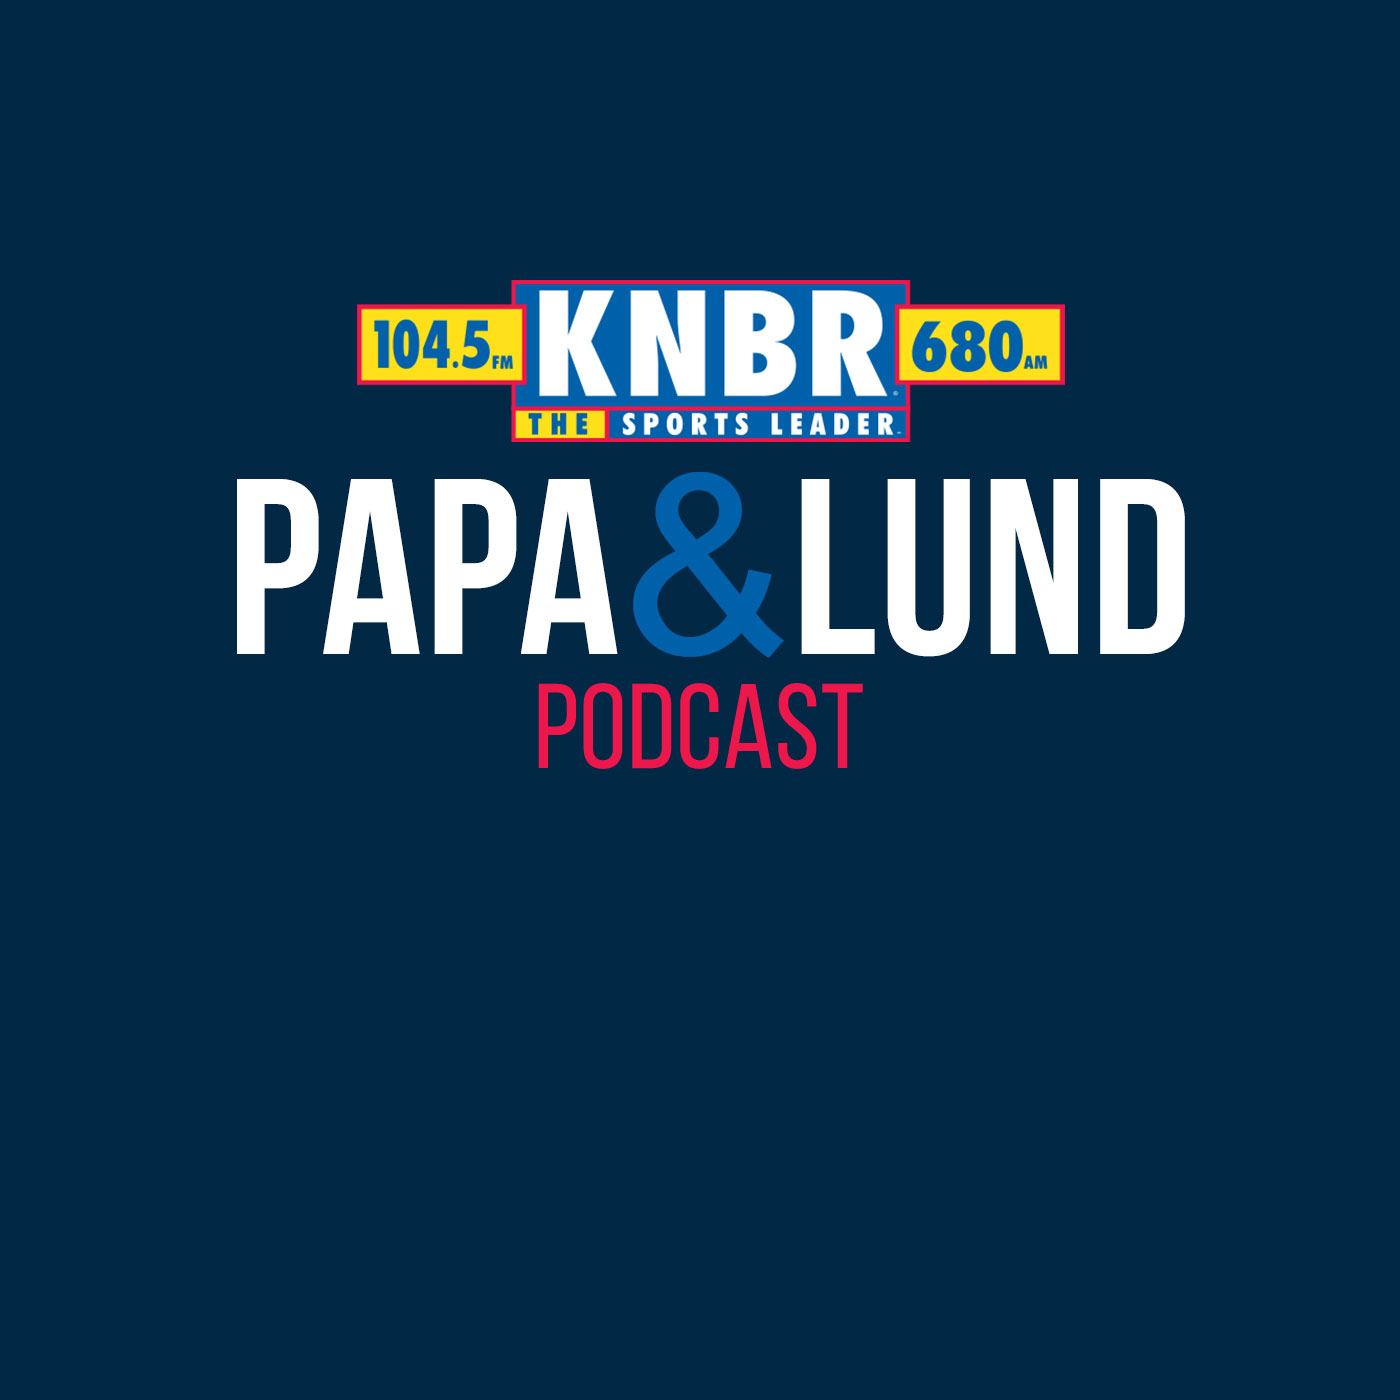 11-27 Donte Whitner joins Papa & Lund to discuss the 49ers Secondary stepping up once again in Seattle and now shifting their focus to Philly and their passing attack